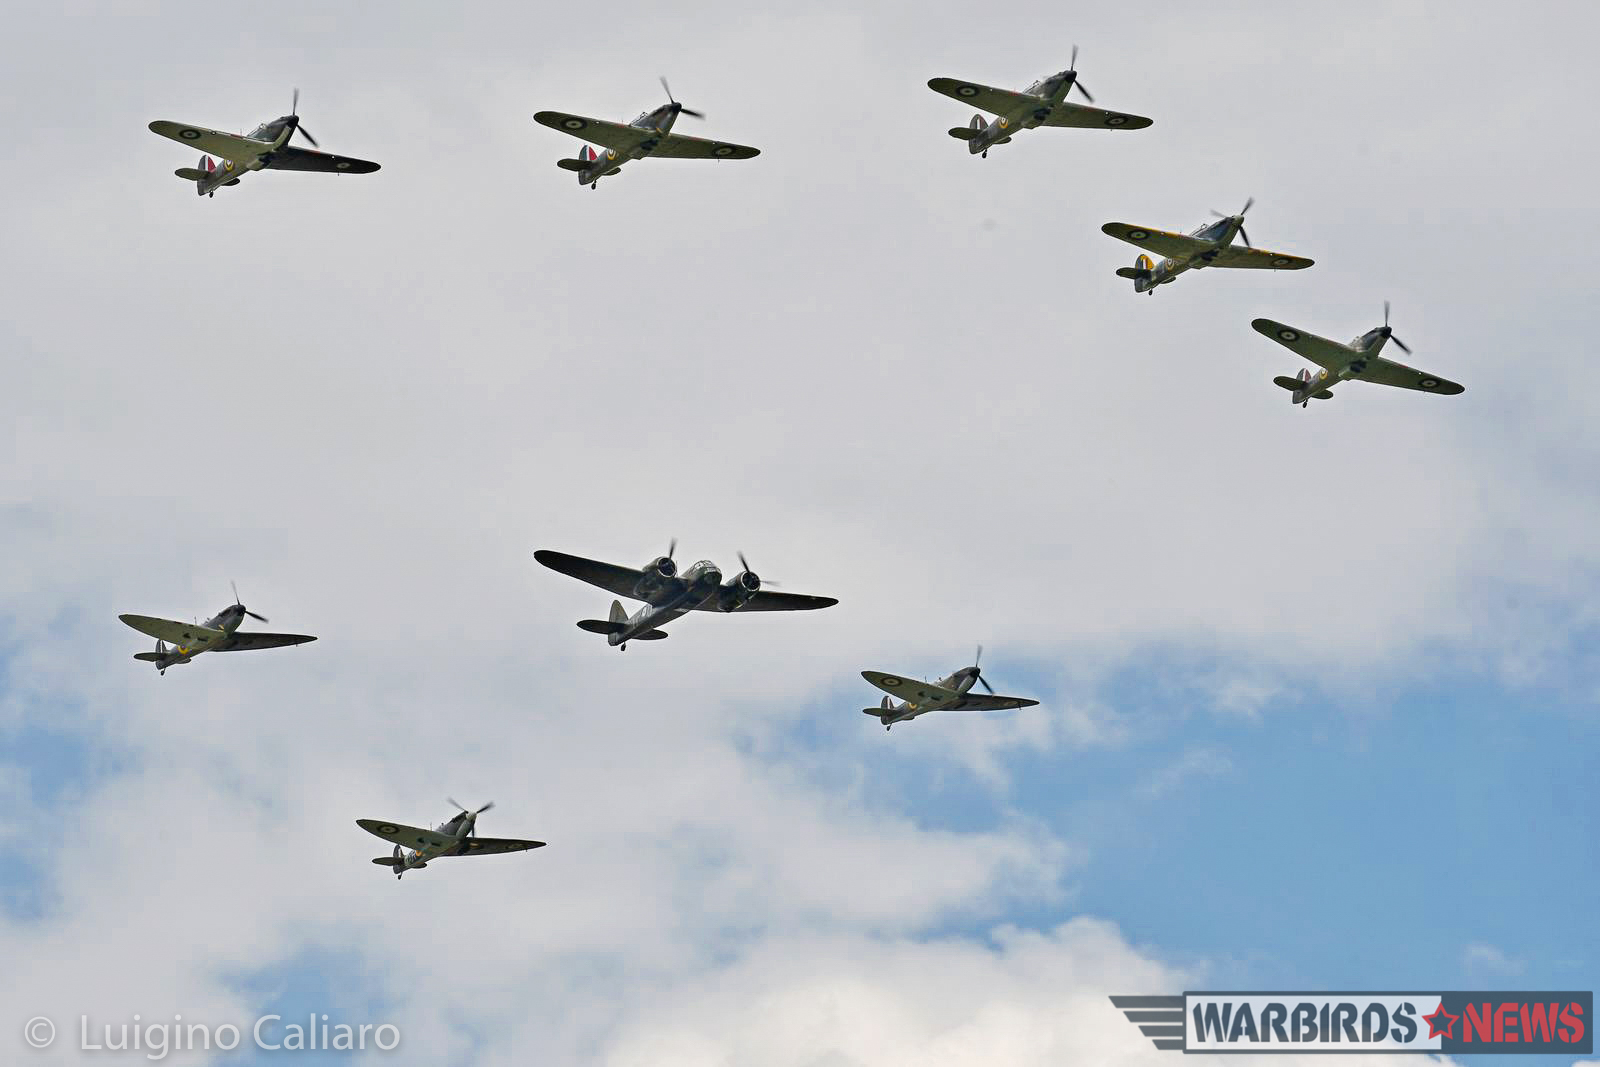 The Battle of Britain flypast, with FIVE Hawker Hurricanes, three Spitfire Mk.Is and a Blenheim Mk.I. A truly staggering sight unimaginable even just a few years ago. (photo by Luigino Caliaro)